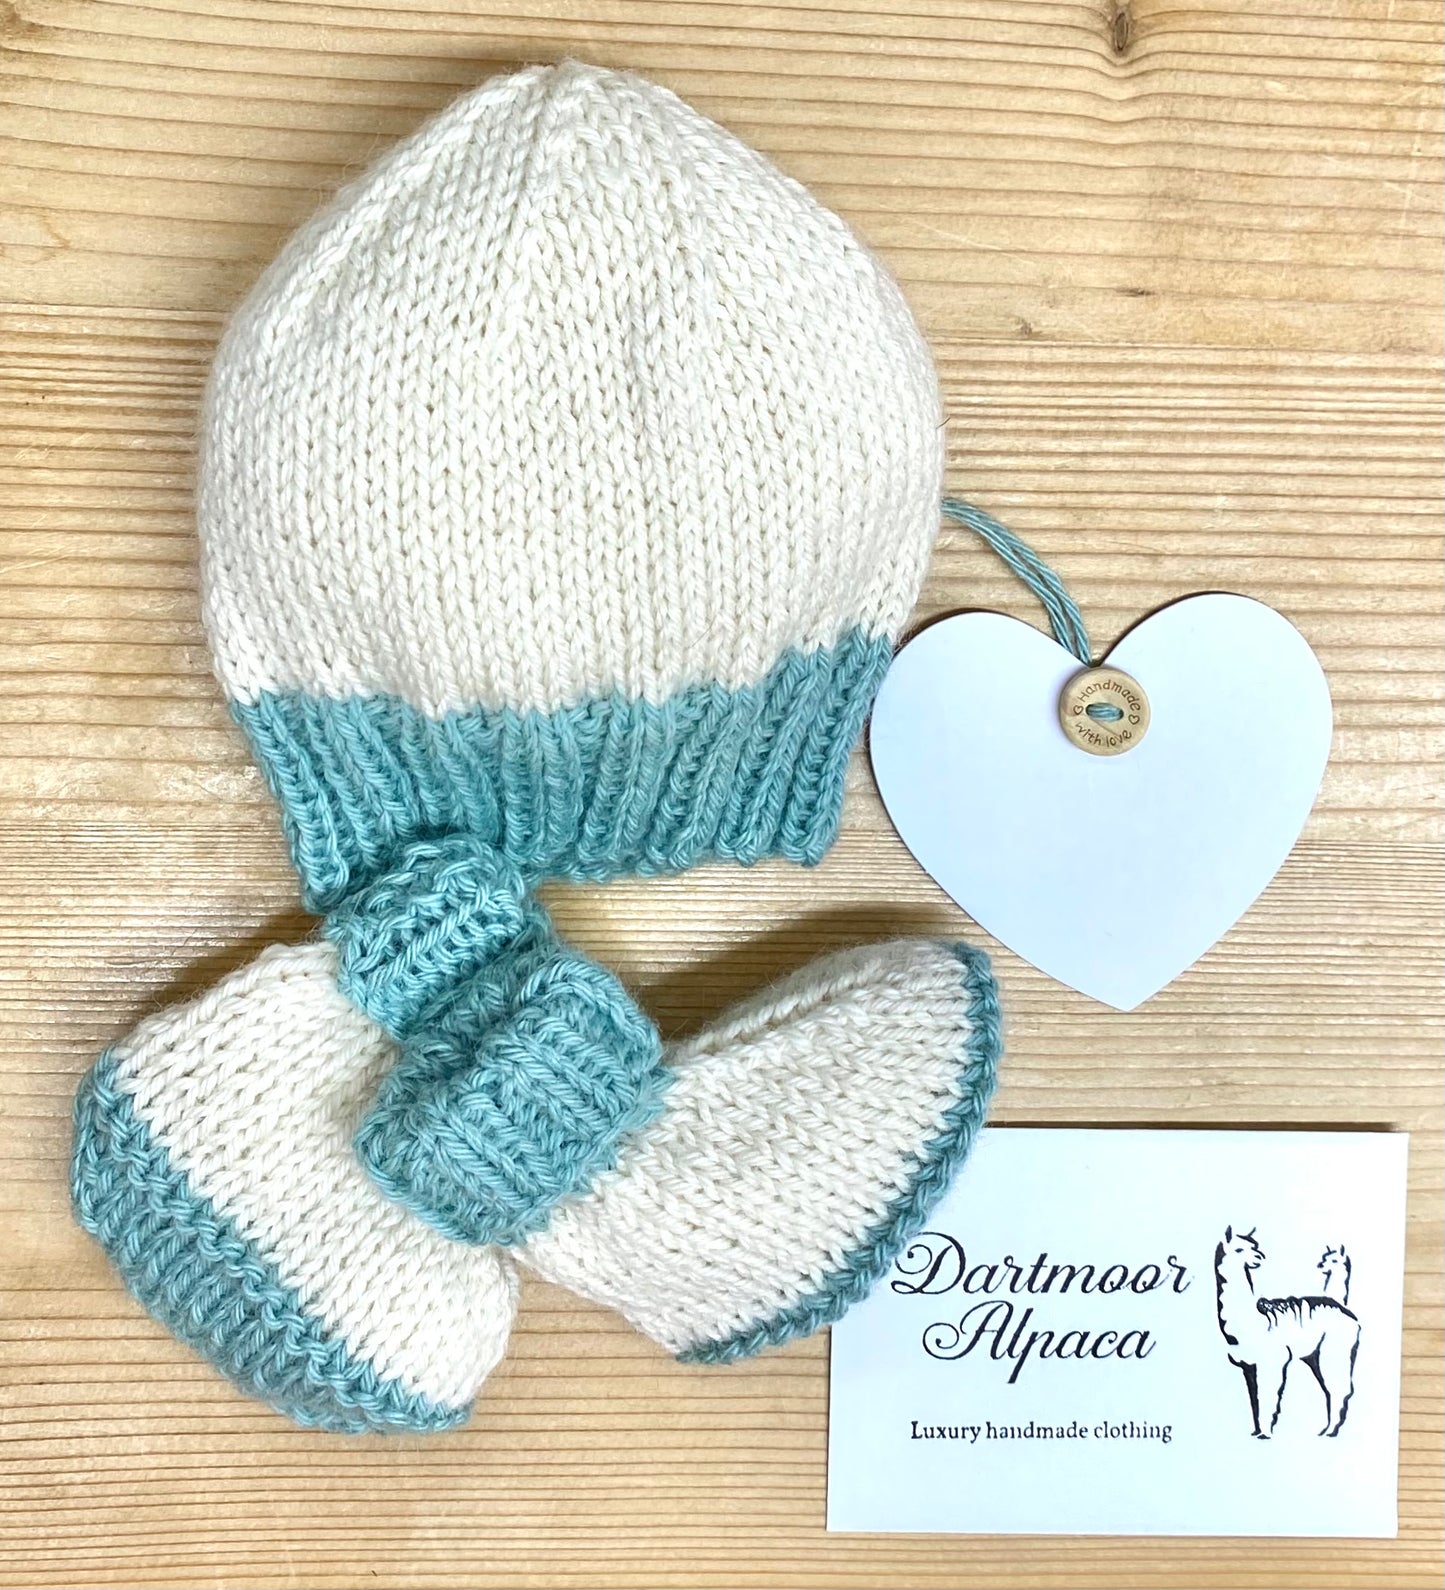 Luxury hand knitted alpaca Hugg Hat and Bootie set